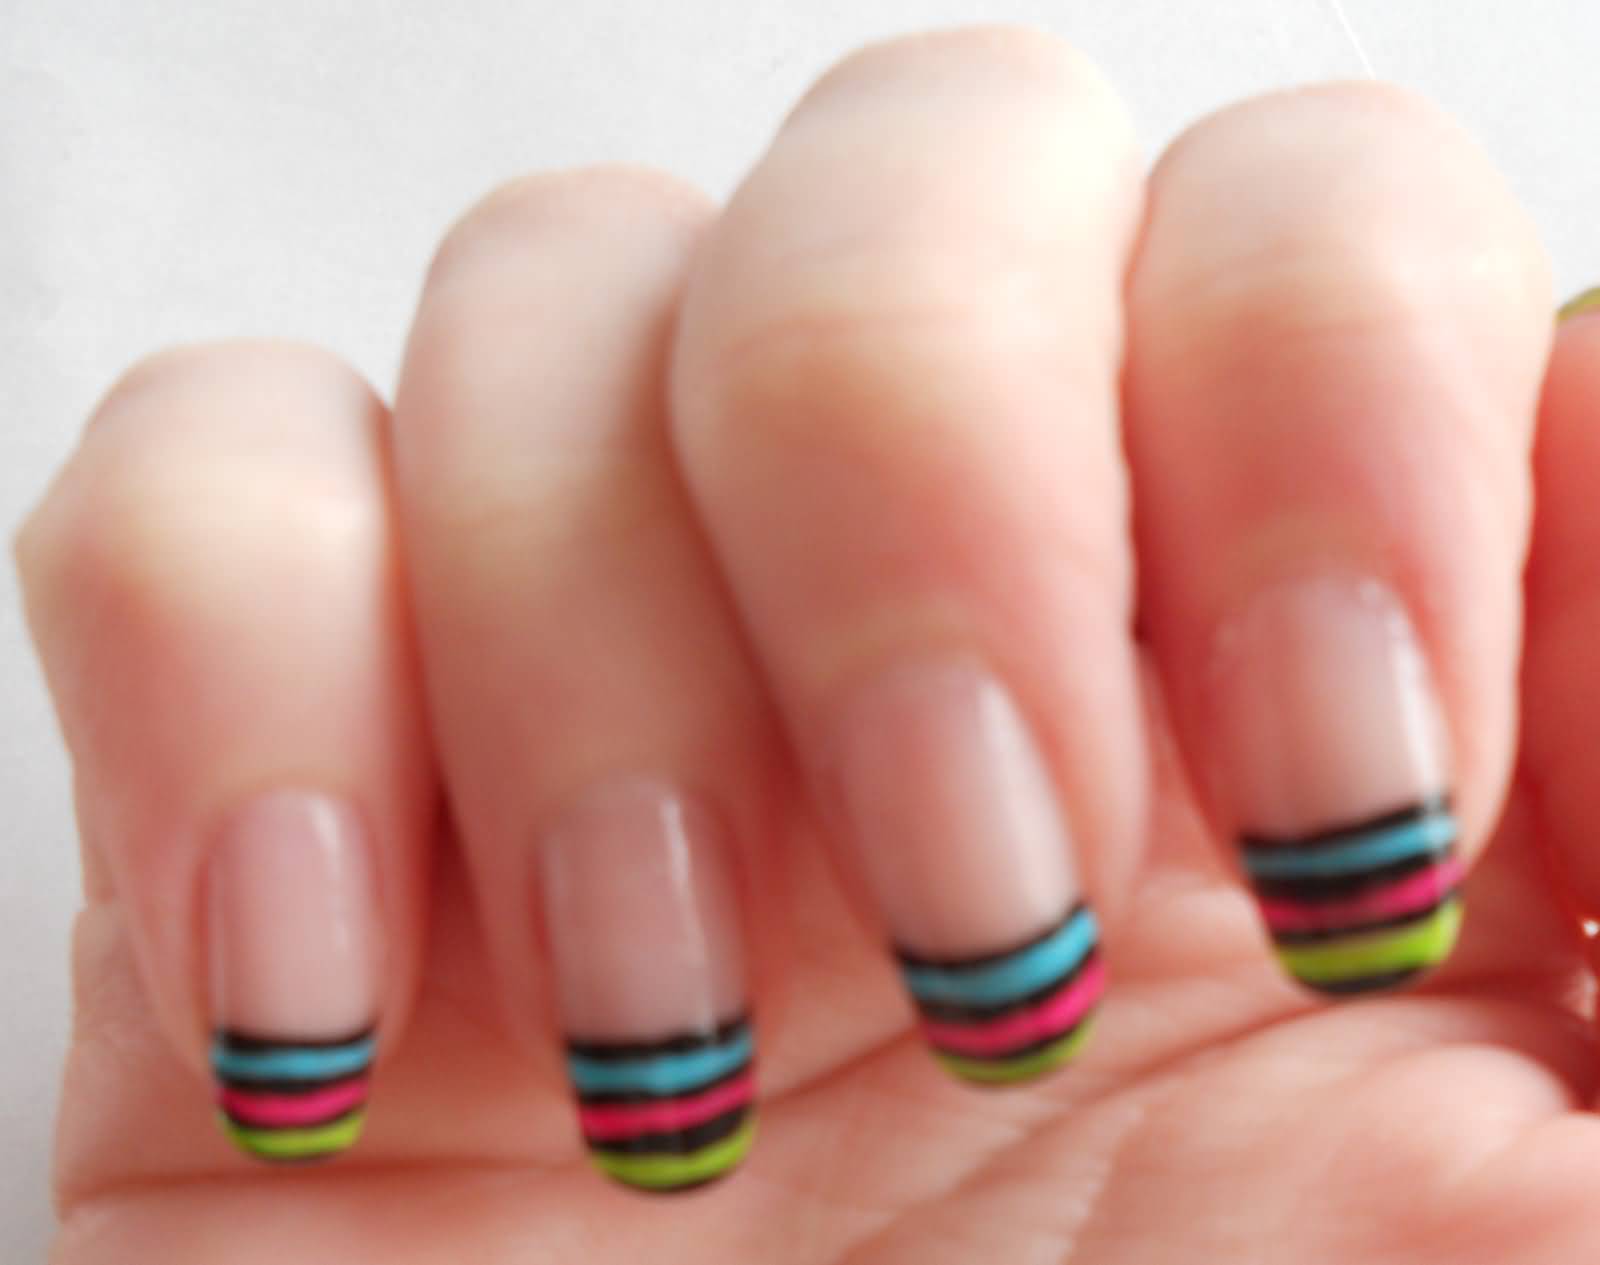 Neon Striped Nail Art: Adding a Pop of Color to Your Everyday Look - wide 1